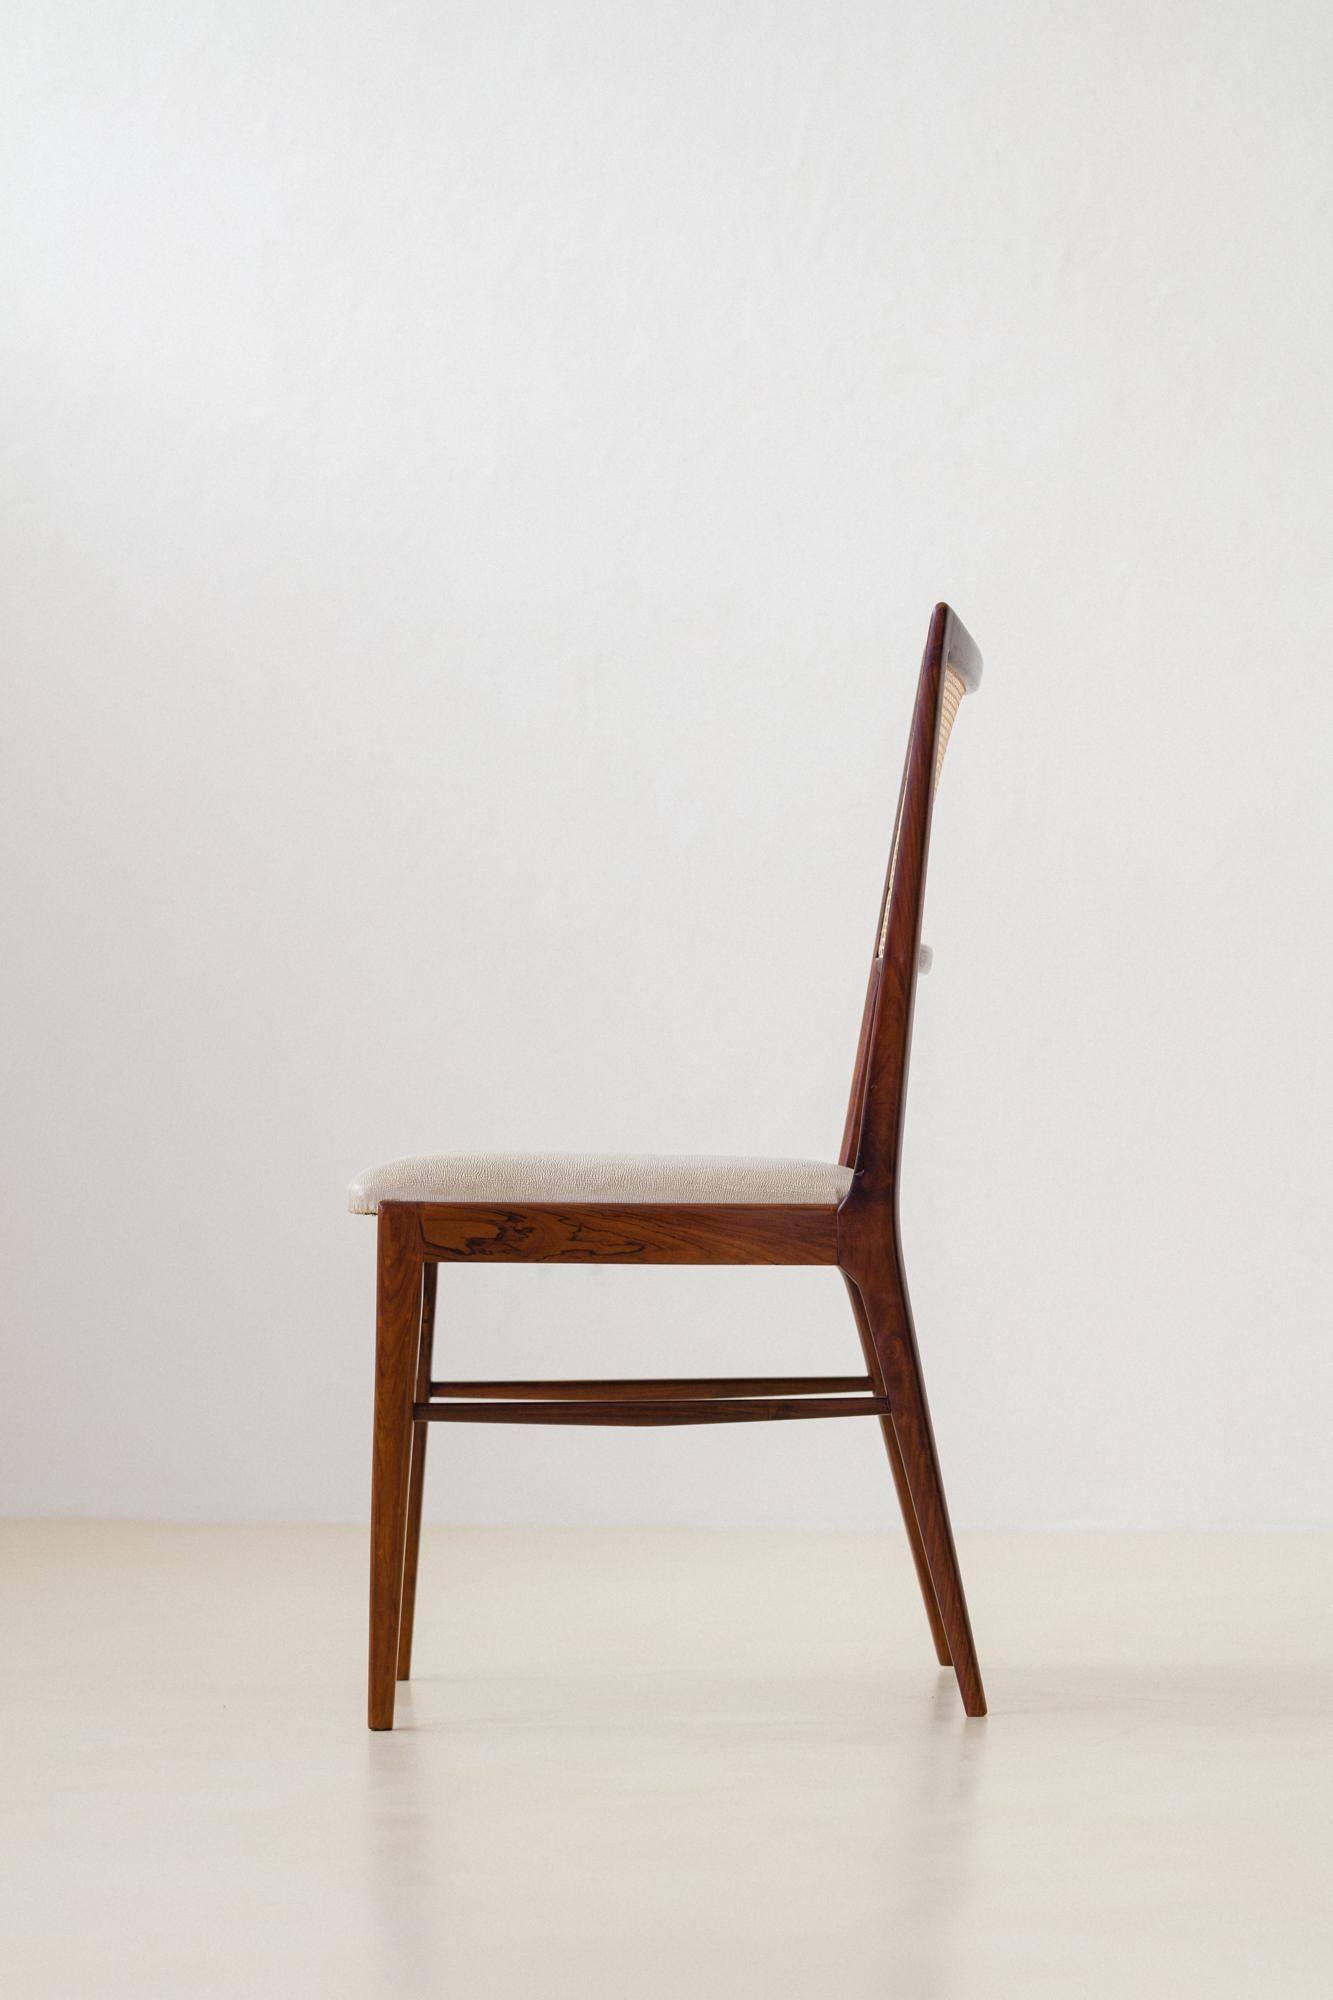 Set of 10 Rosewood and Cane Dining Chairs, Unknown Designer, 1950s For Sale 10